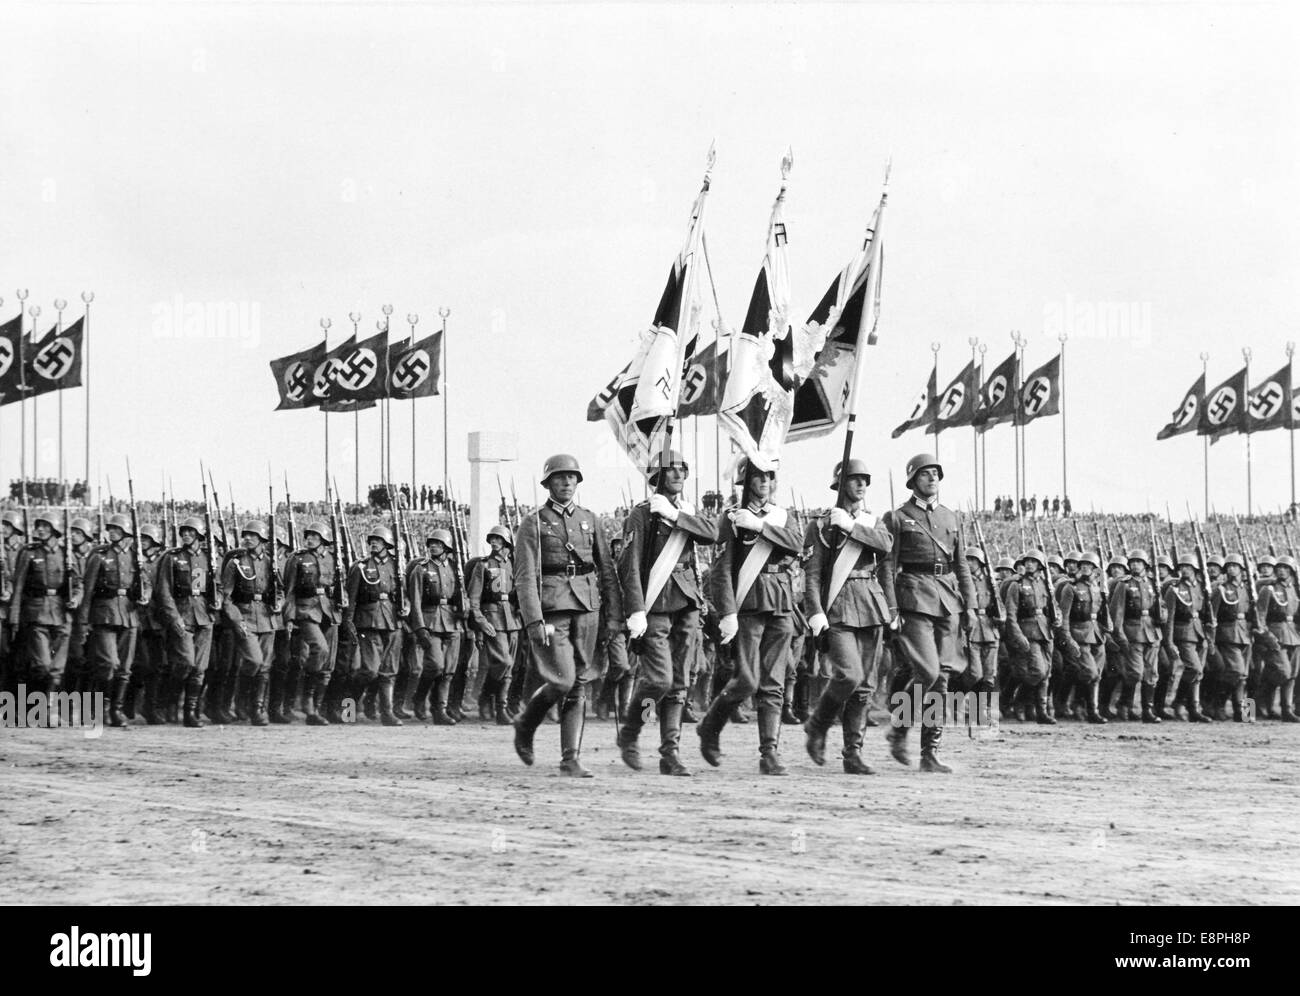 Nuremberg Rally 1937 in Nuremberg, Germany - Nazi party rally grounds - Demonstration by the German Wehrmacht (armed forces) on Zeppelin Field, here parade of the infantry. (Flaws in quality due to the historic picture copy) Fotoarchiv für Zeitgeschichtee - NO WIRE SERVICE - Stock Photo